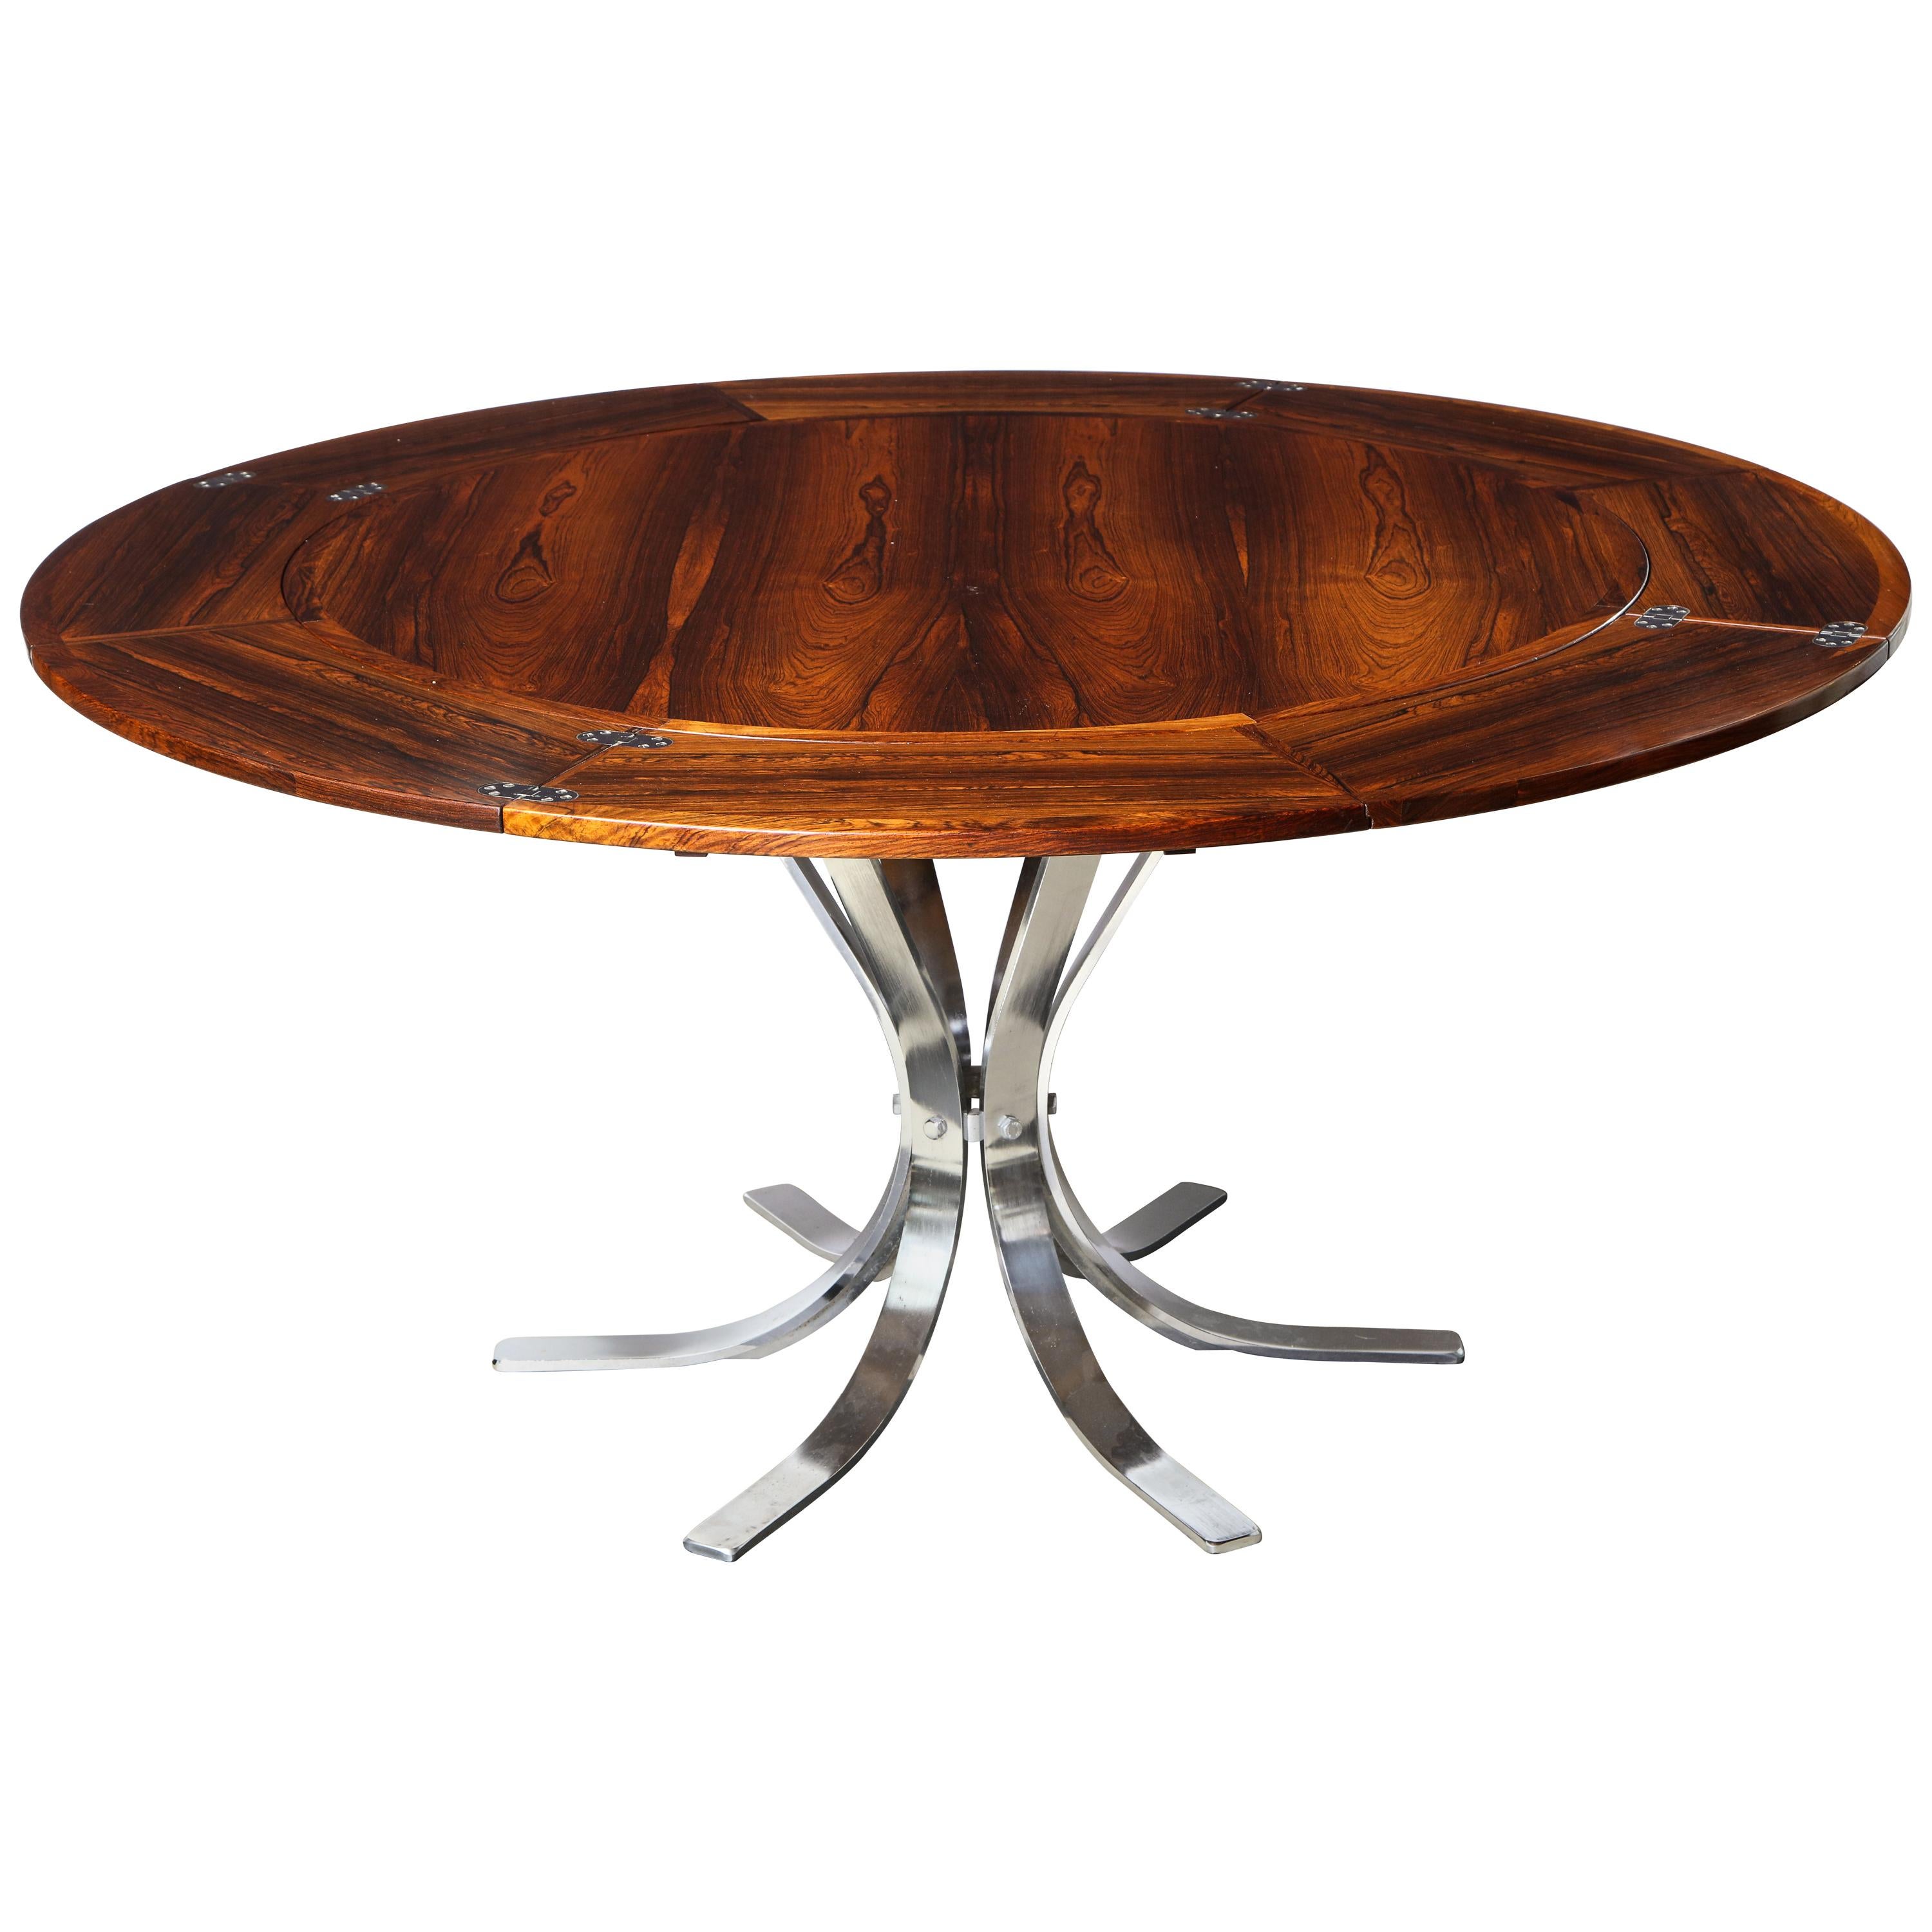 Danish Rosewood "Lotus Design" Dining Table with nickel plated base by Dyrlund